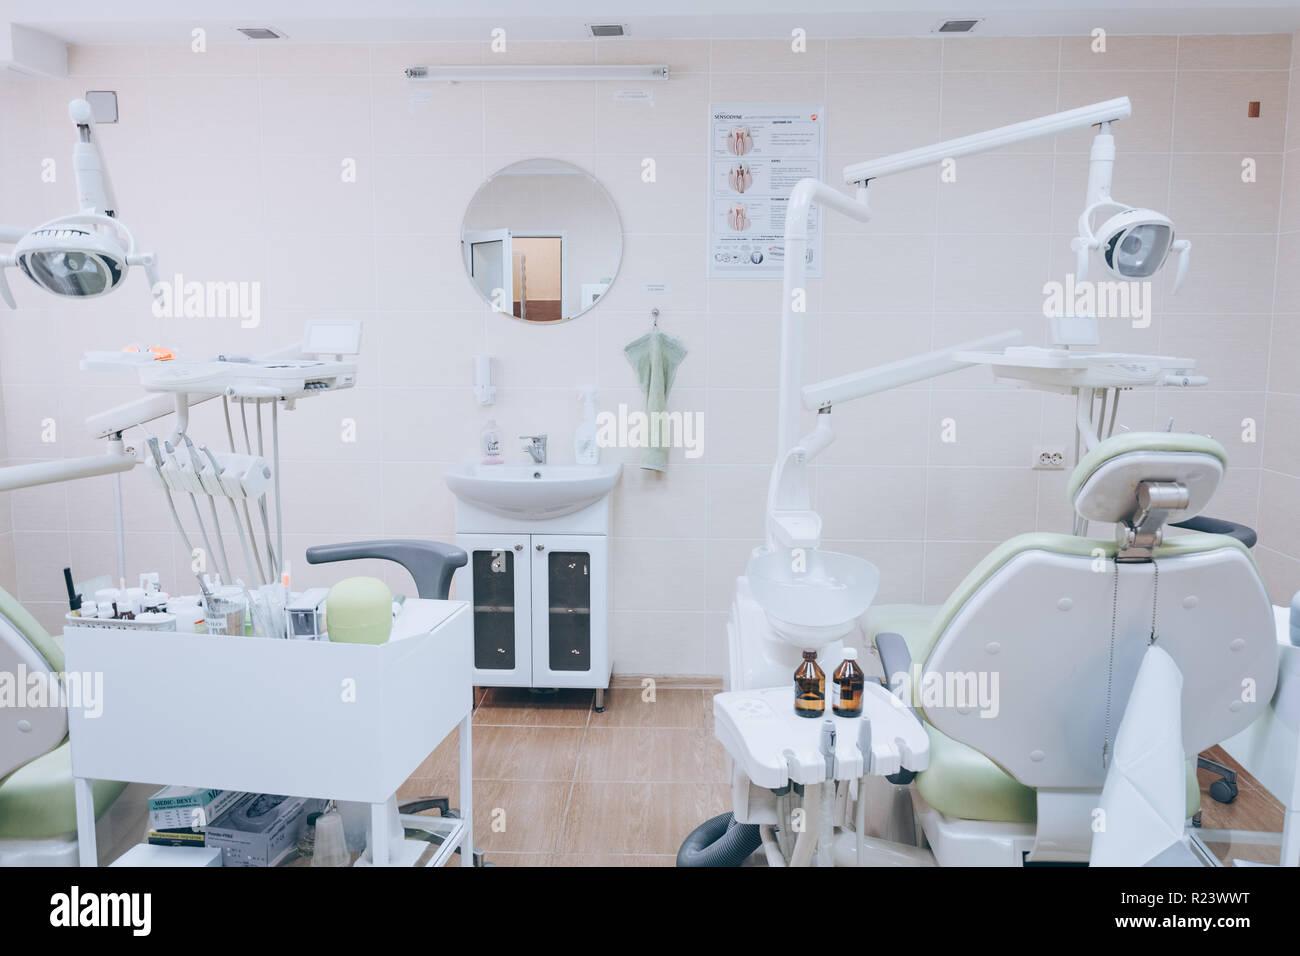 Stomatology Interior Of Small Dental Clinic With